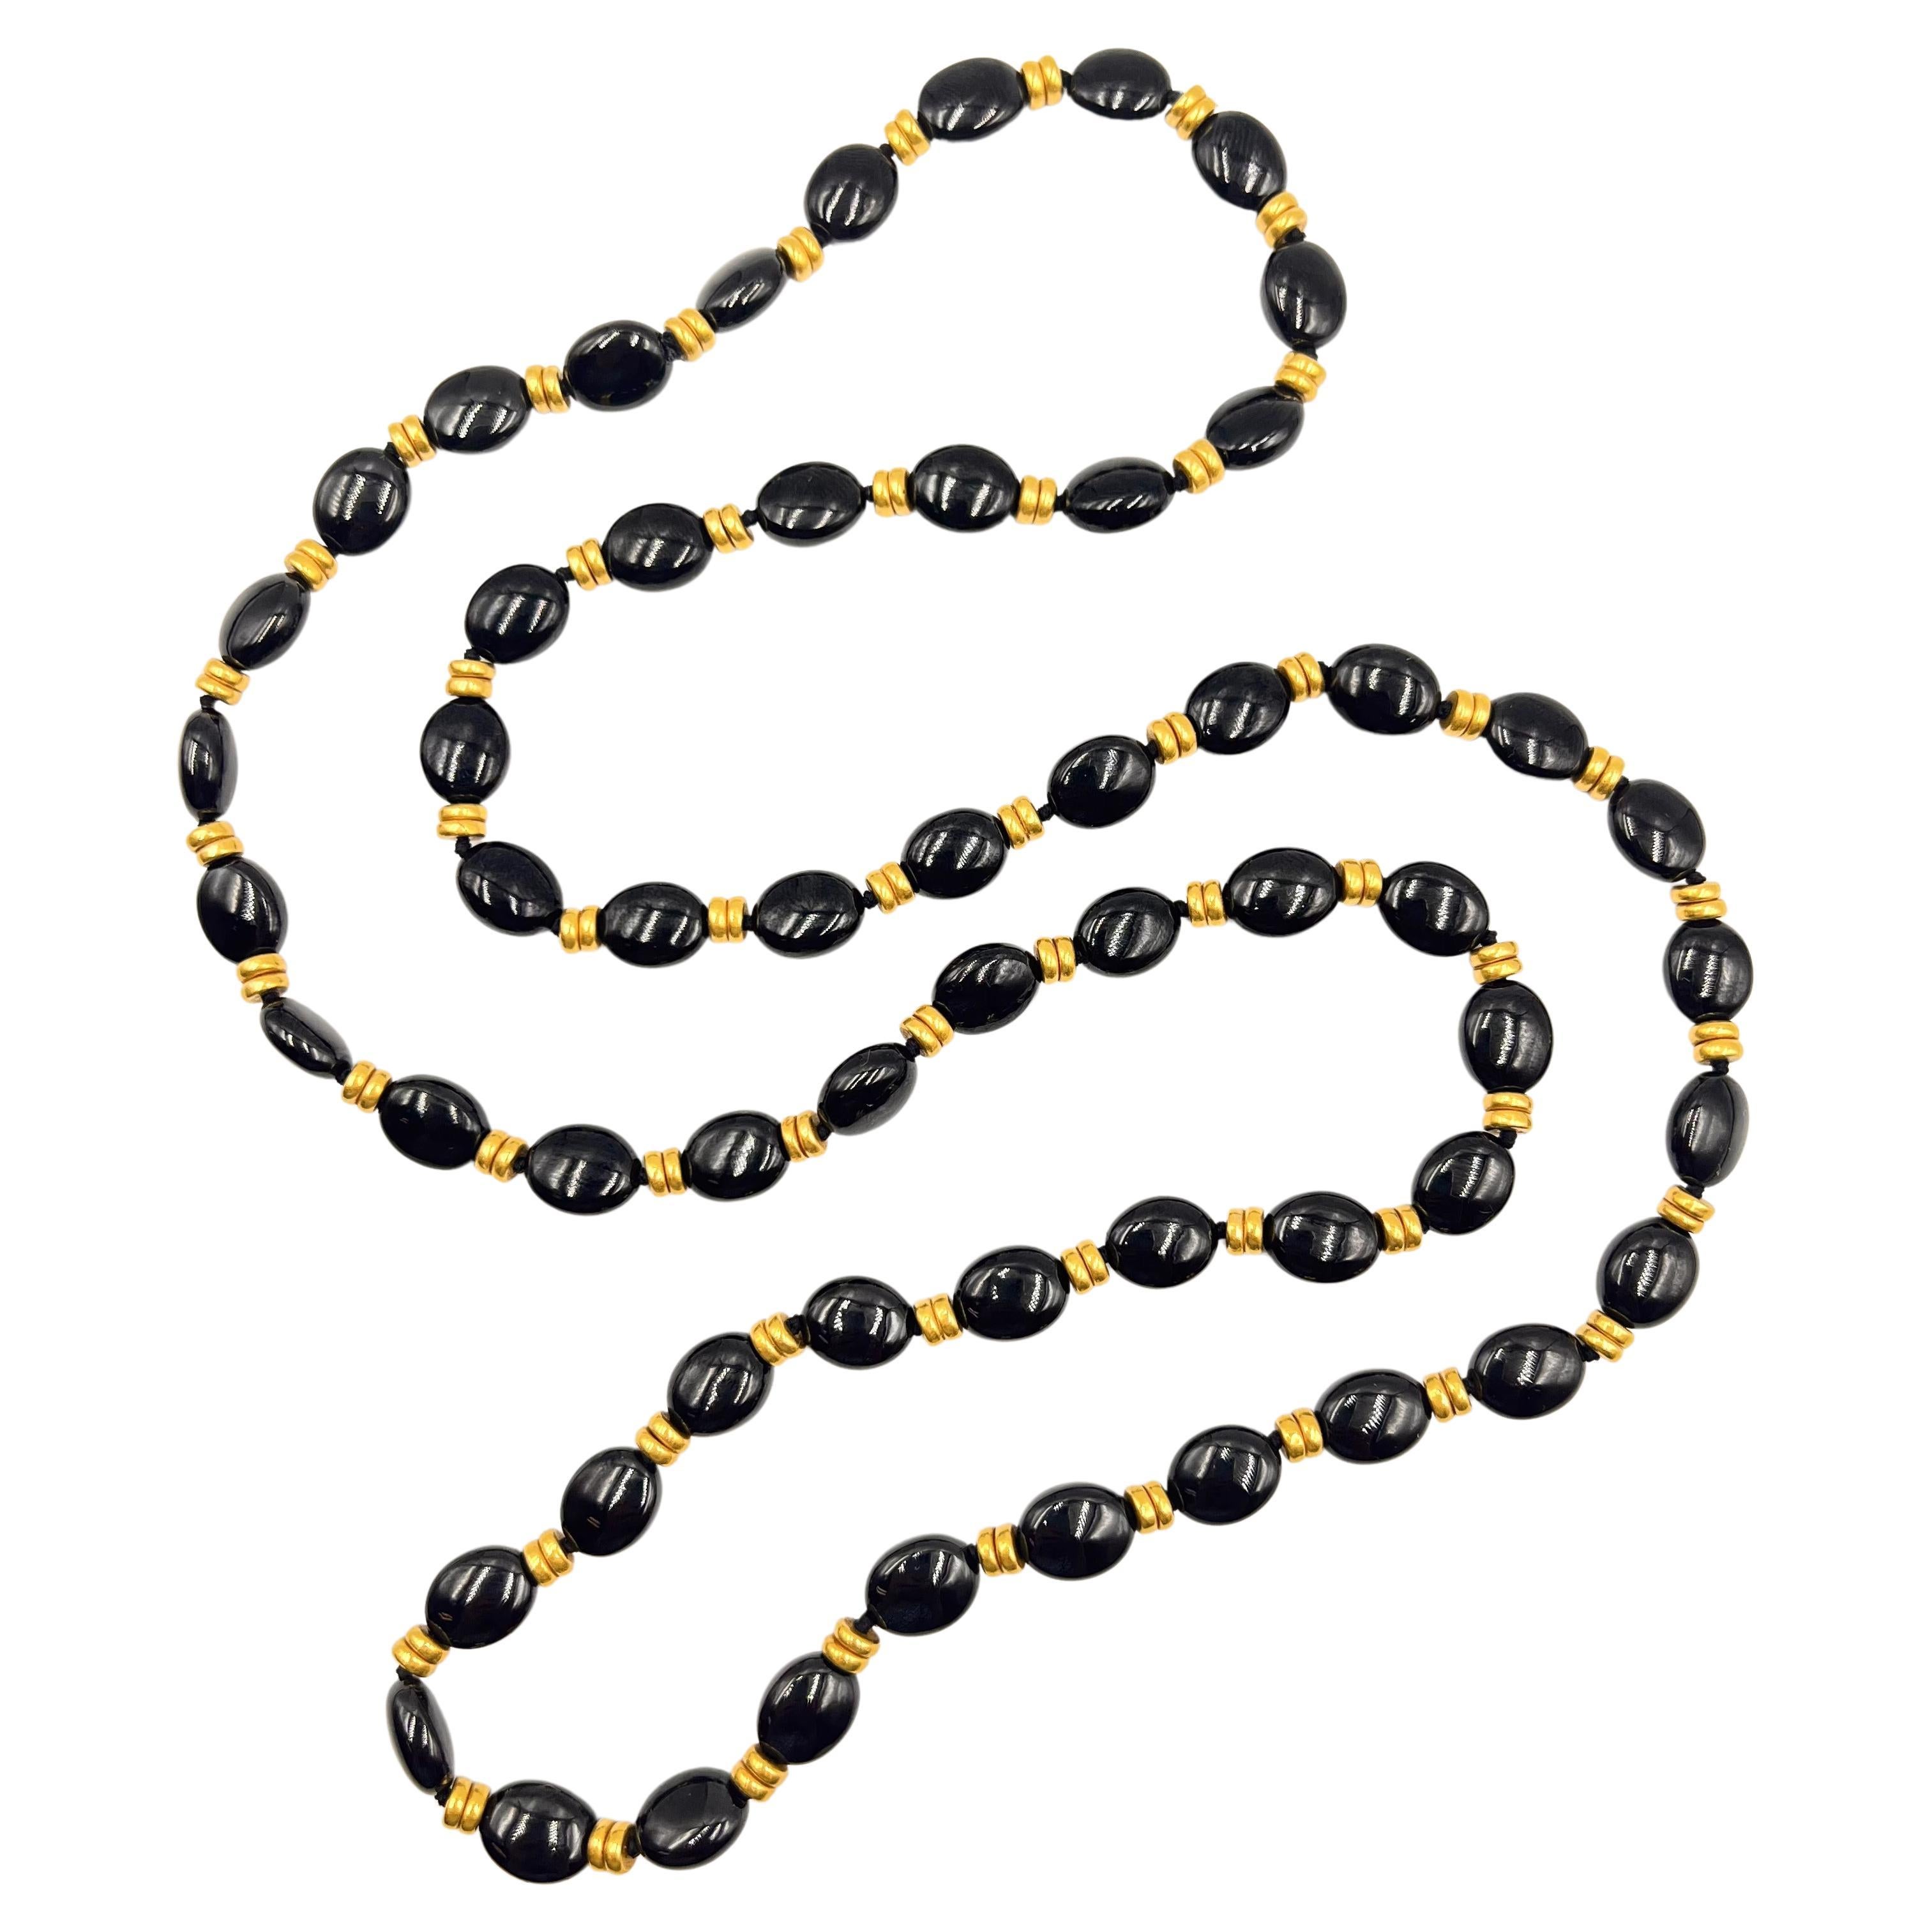 Long necklace, featuring a single-strand of fifty-eight oval black onyx polished beads with double rings of 18kt yellow gold rondelle-style beads set in between each.  Measuring 32